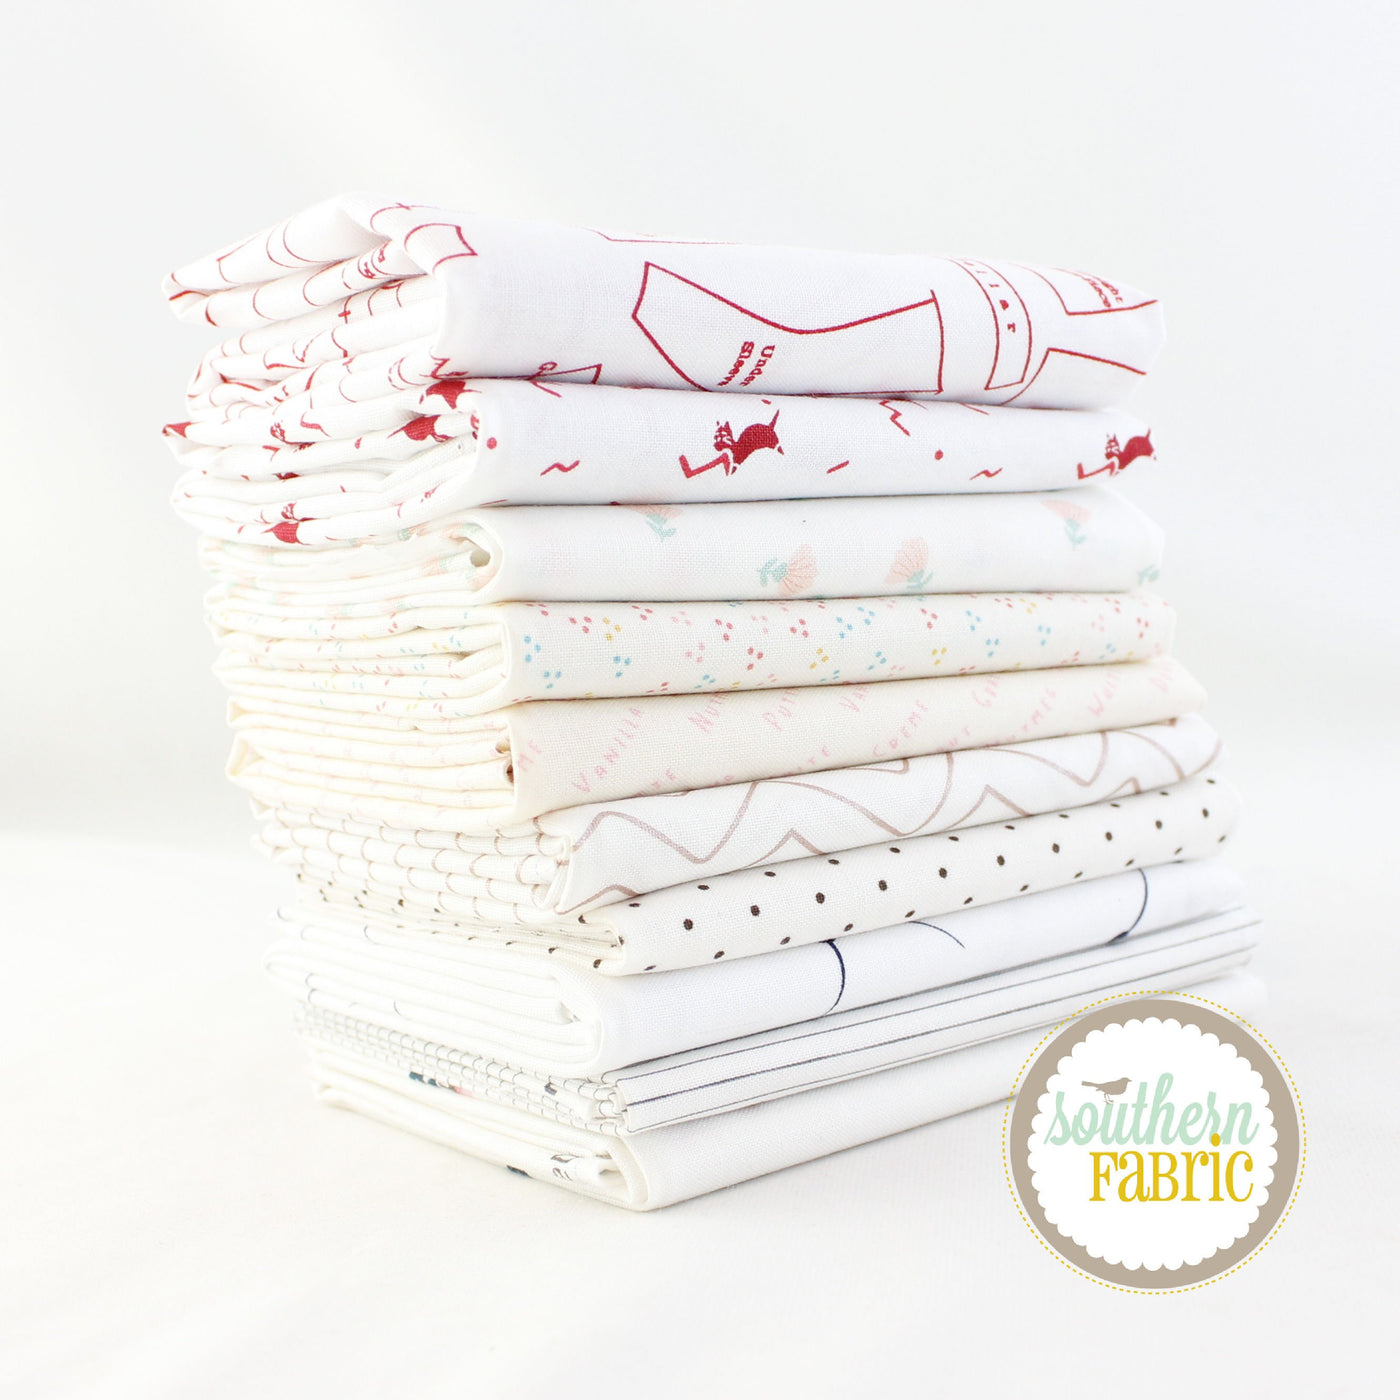 White Low Volume Half Yard Bundle (10 pcs) by Mixed Designers for Southern Fabric